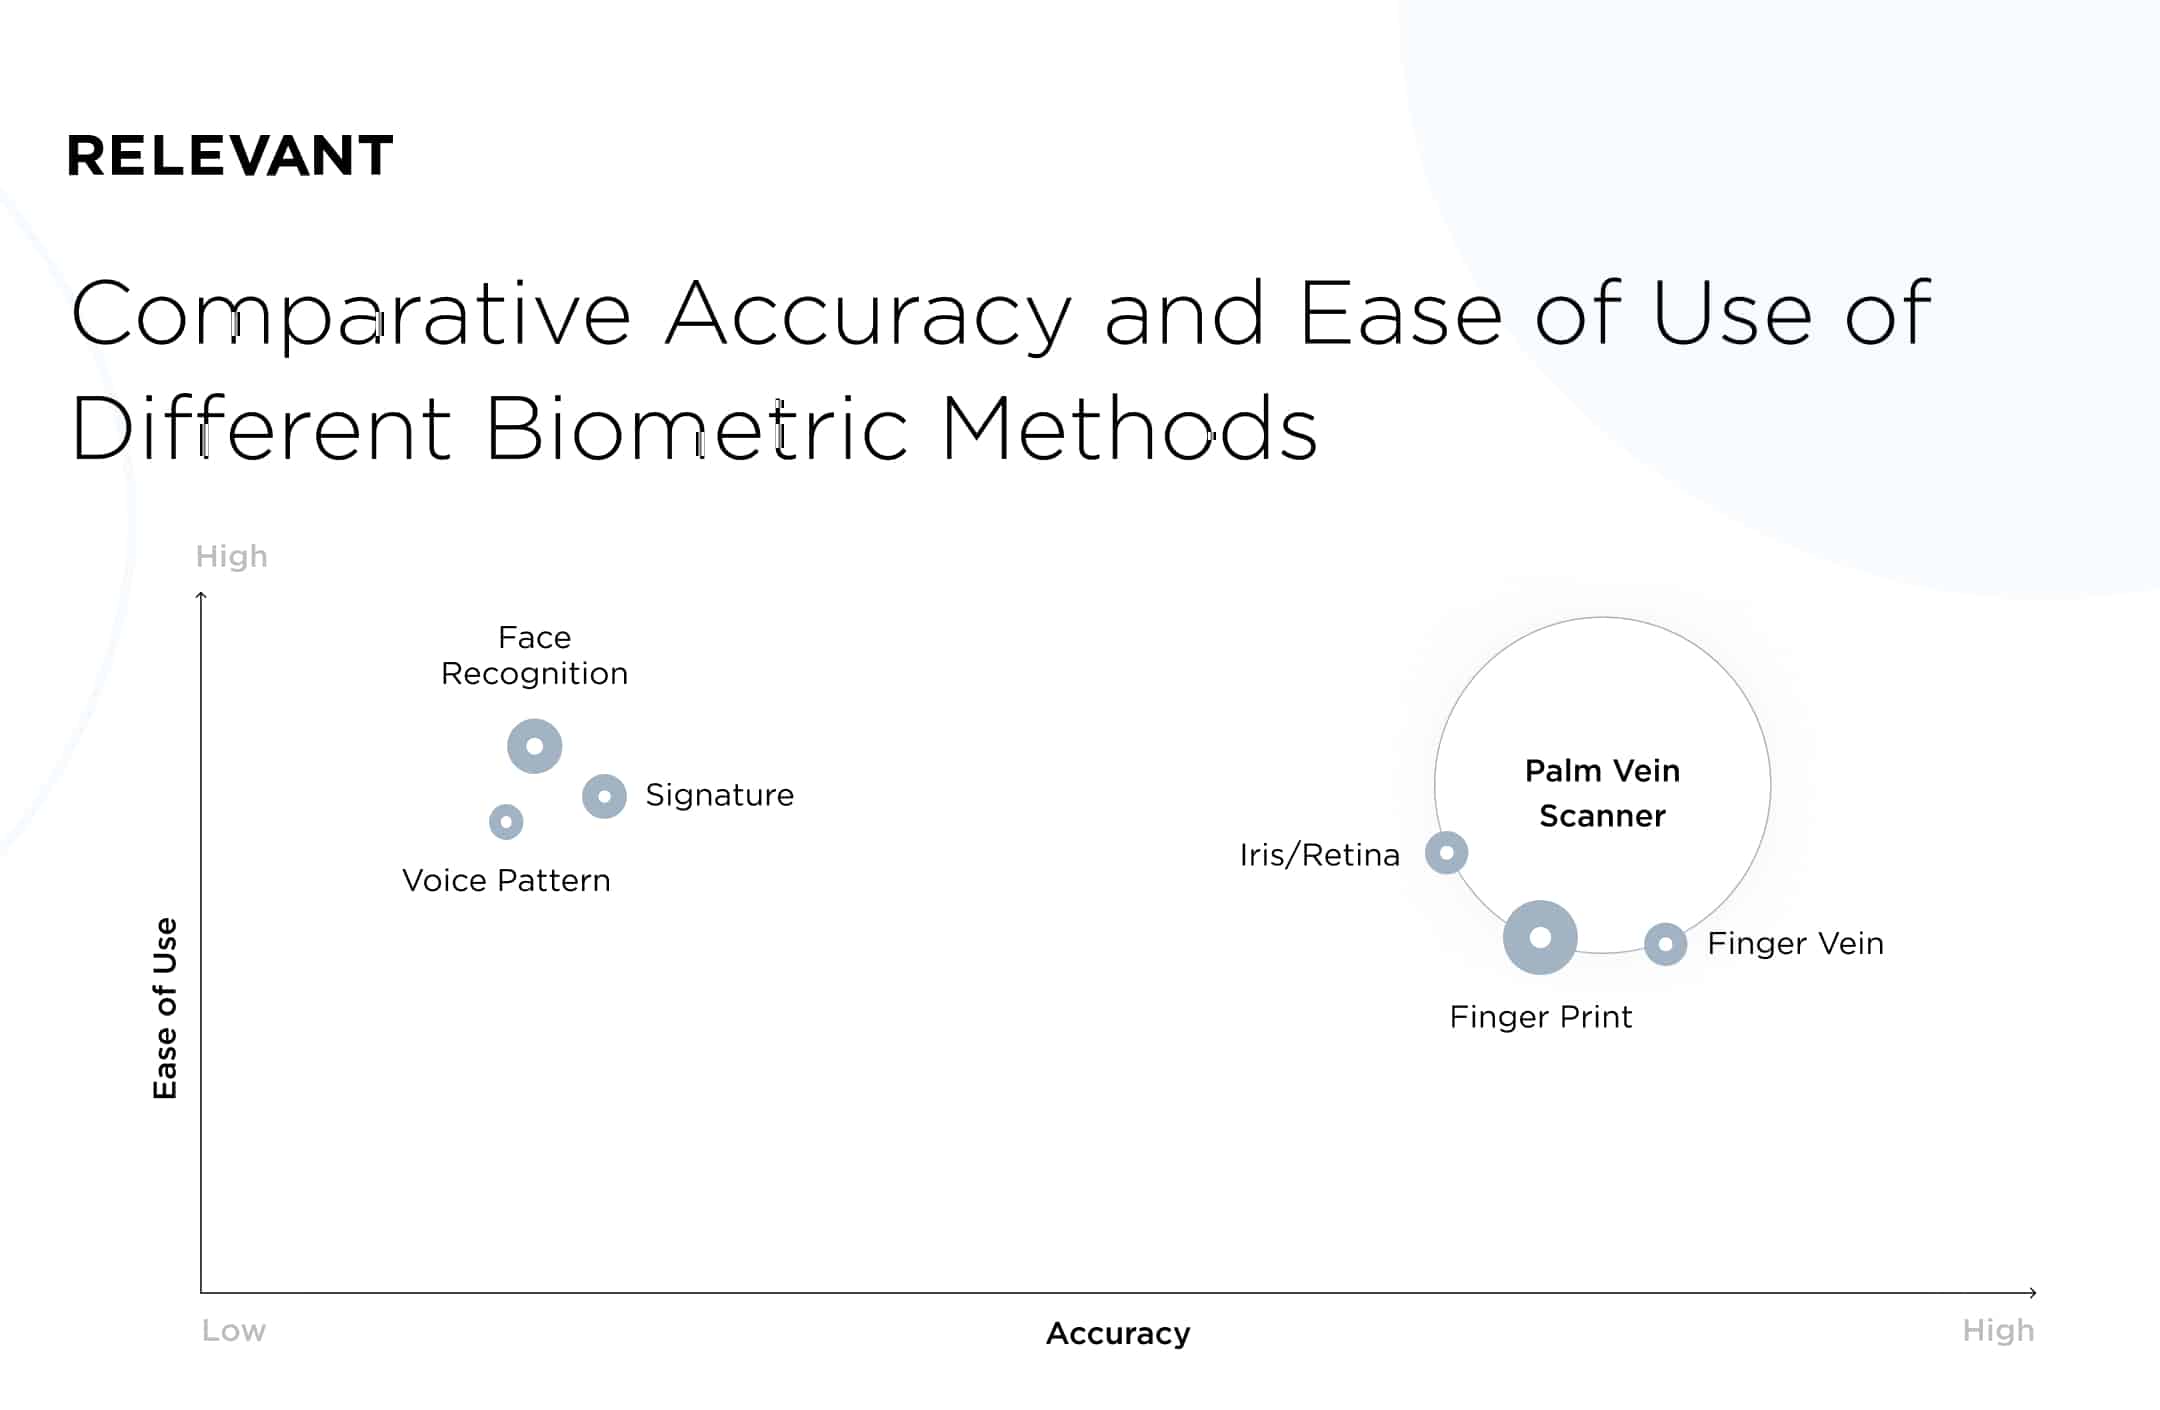 Accuracy and Ease of Use of Different Biometric Methods for a palm scanner